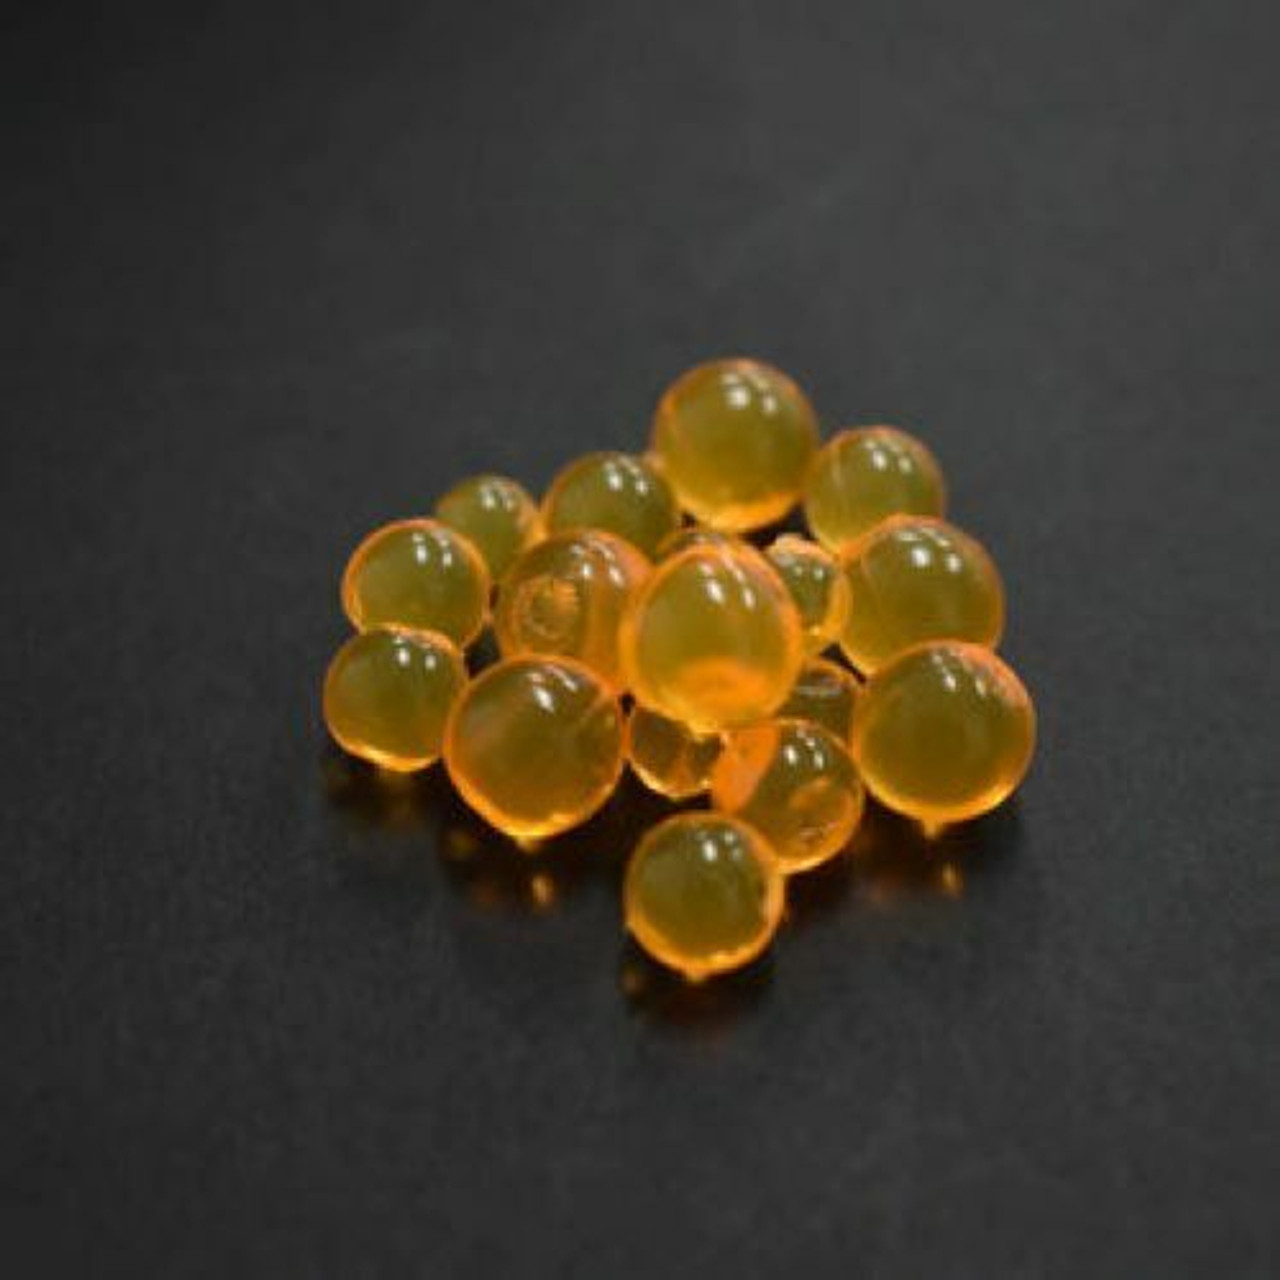 Death Roe 1/4 Soft Scented Fishing Beads - SteelheadStuff Float and Fly  Gear